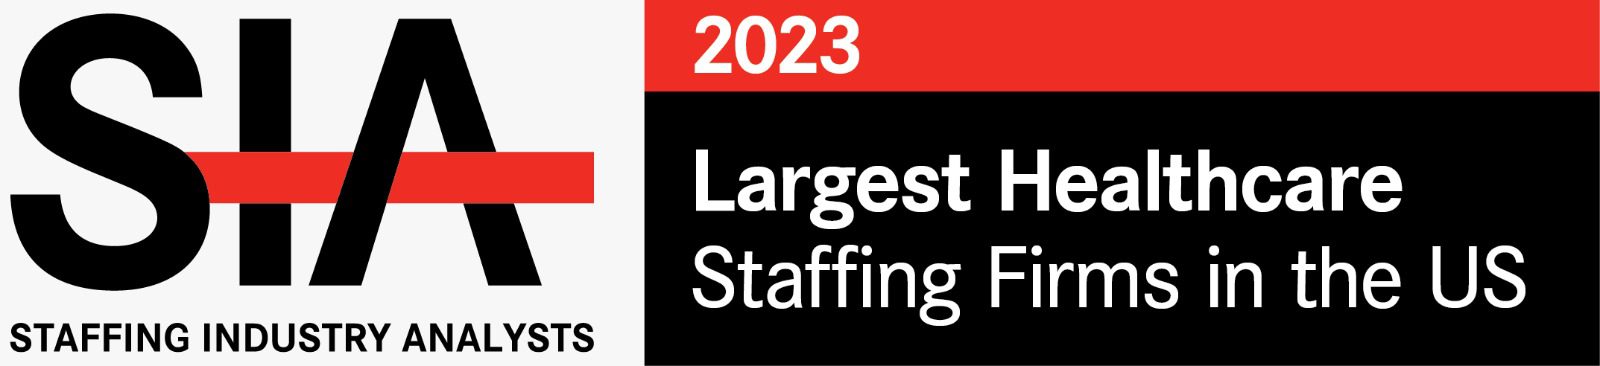 SIA’s Largest Healthcare Staffing Firms in the US 2023